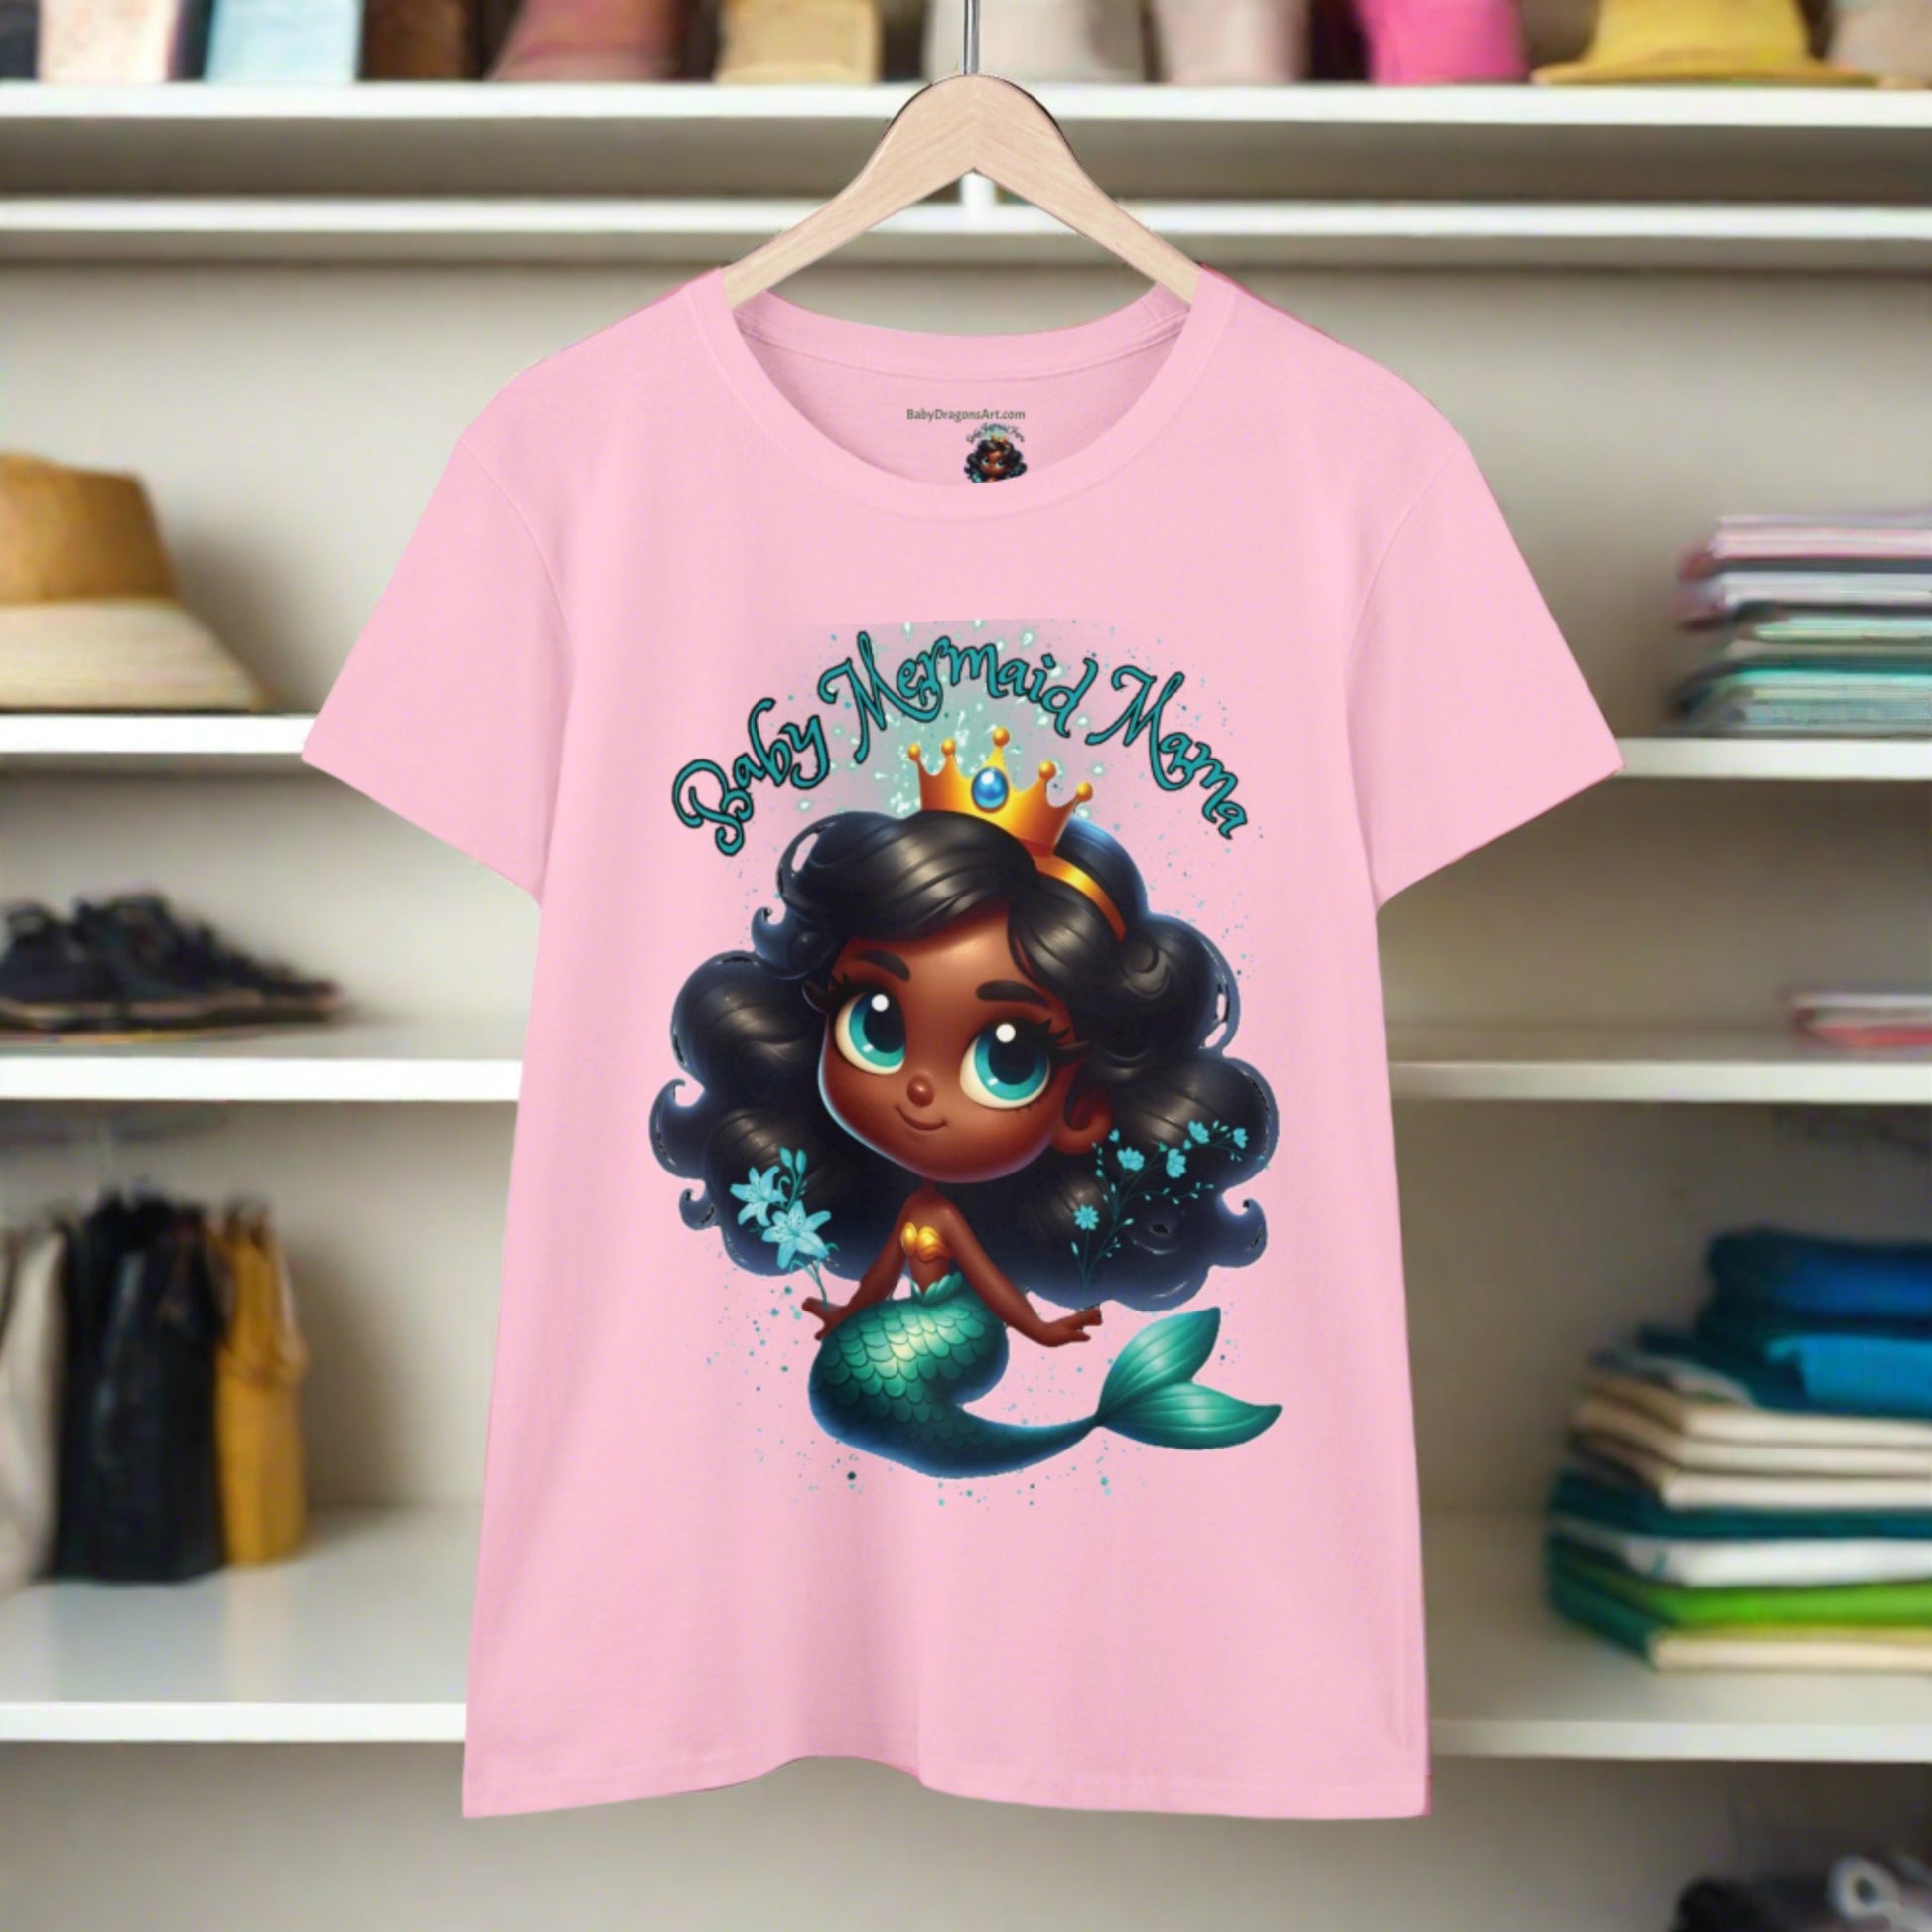 on a light pink tee a baby mermaid with black hair and a green tail wearing a gold crown